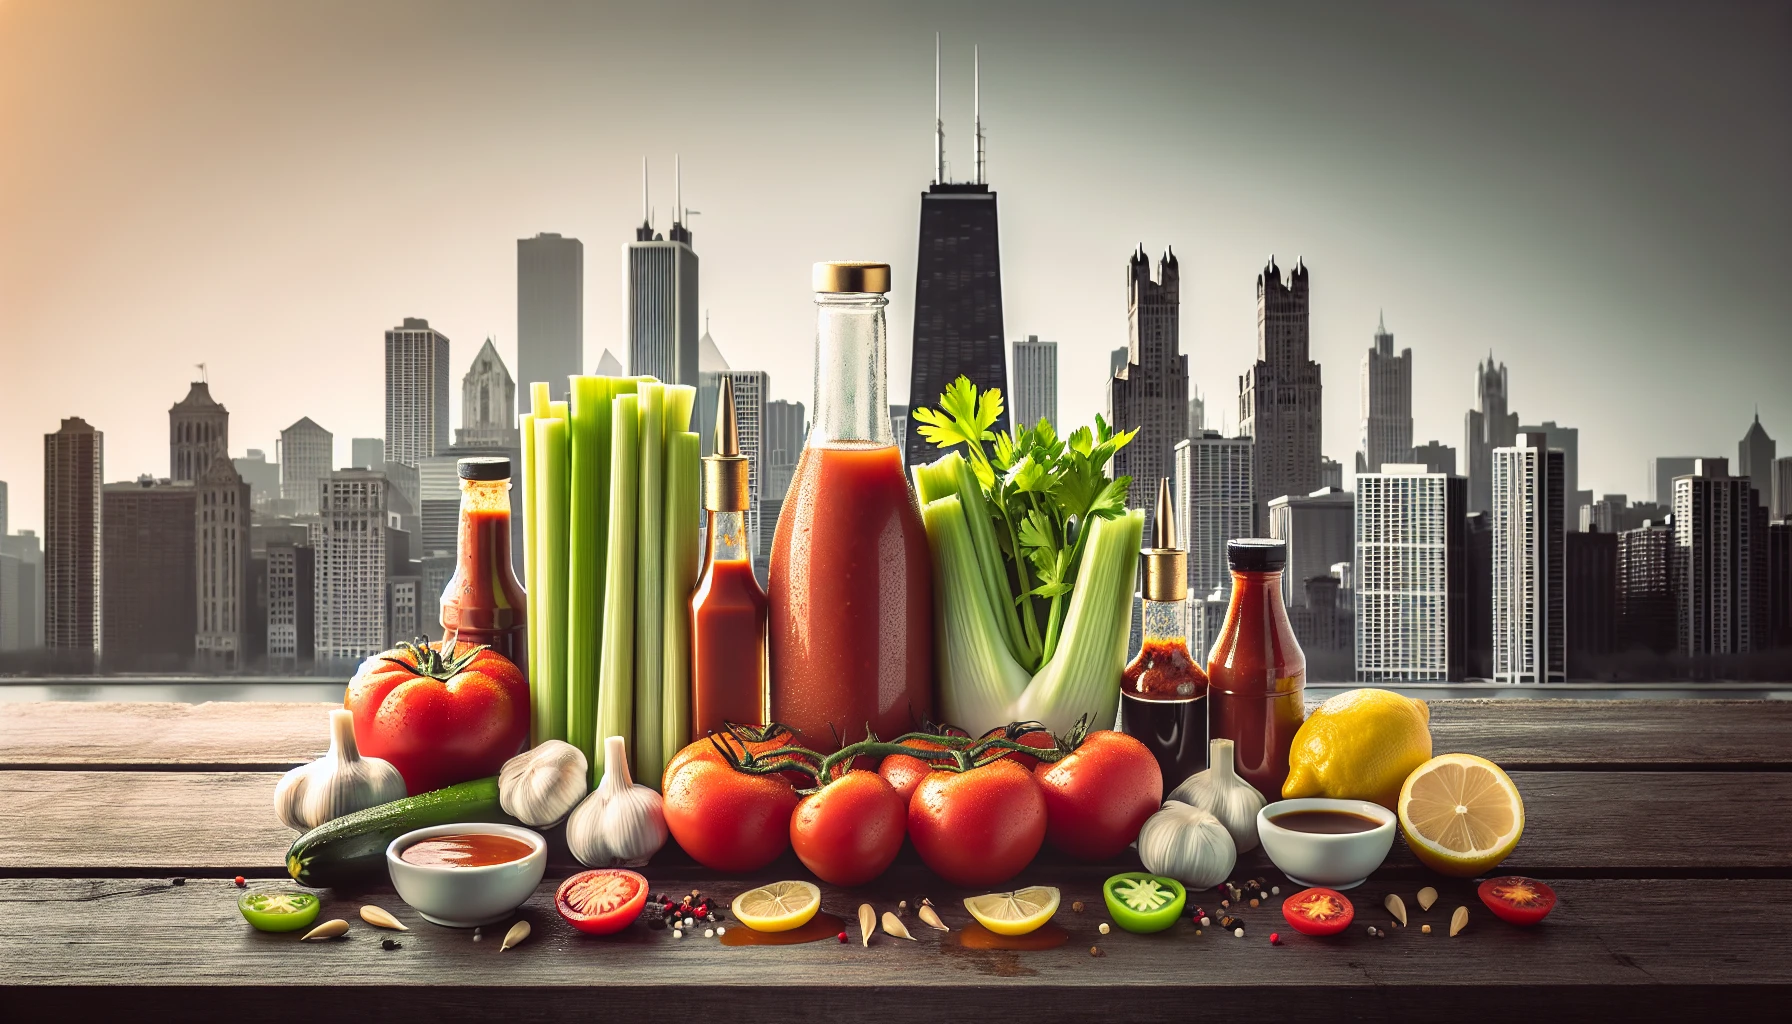 Bloody mary ingredients in Chicago? Like, whoa!